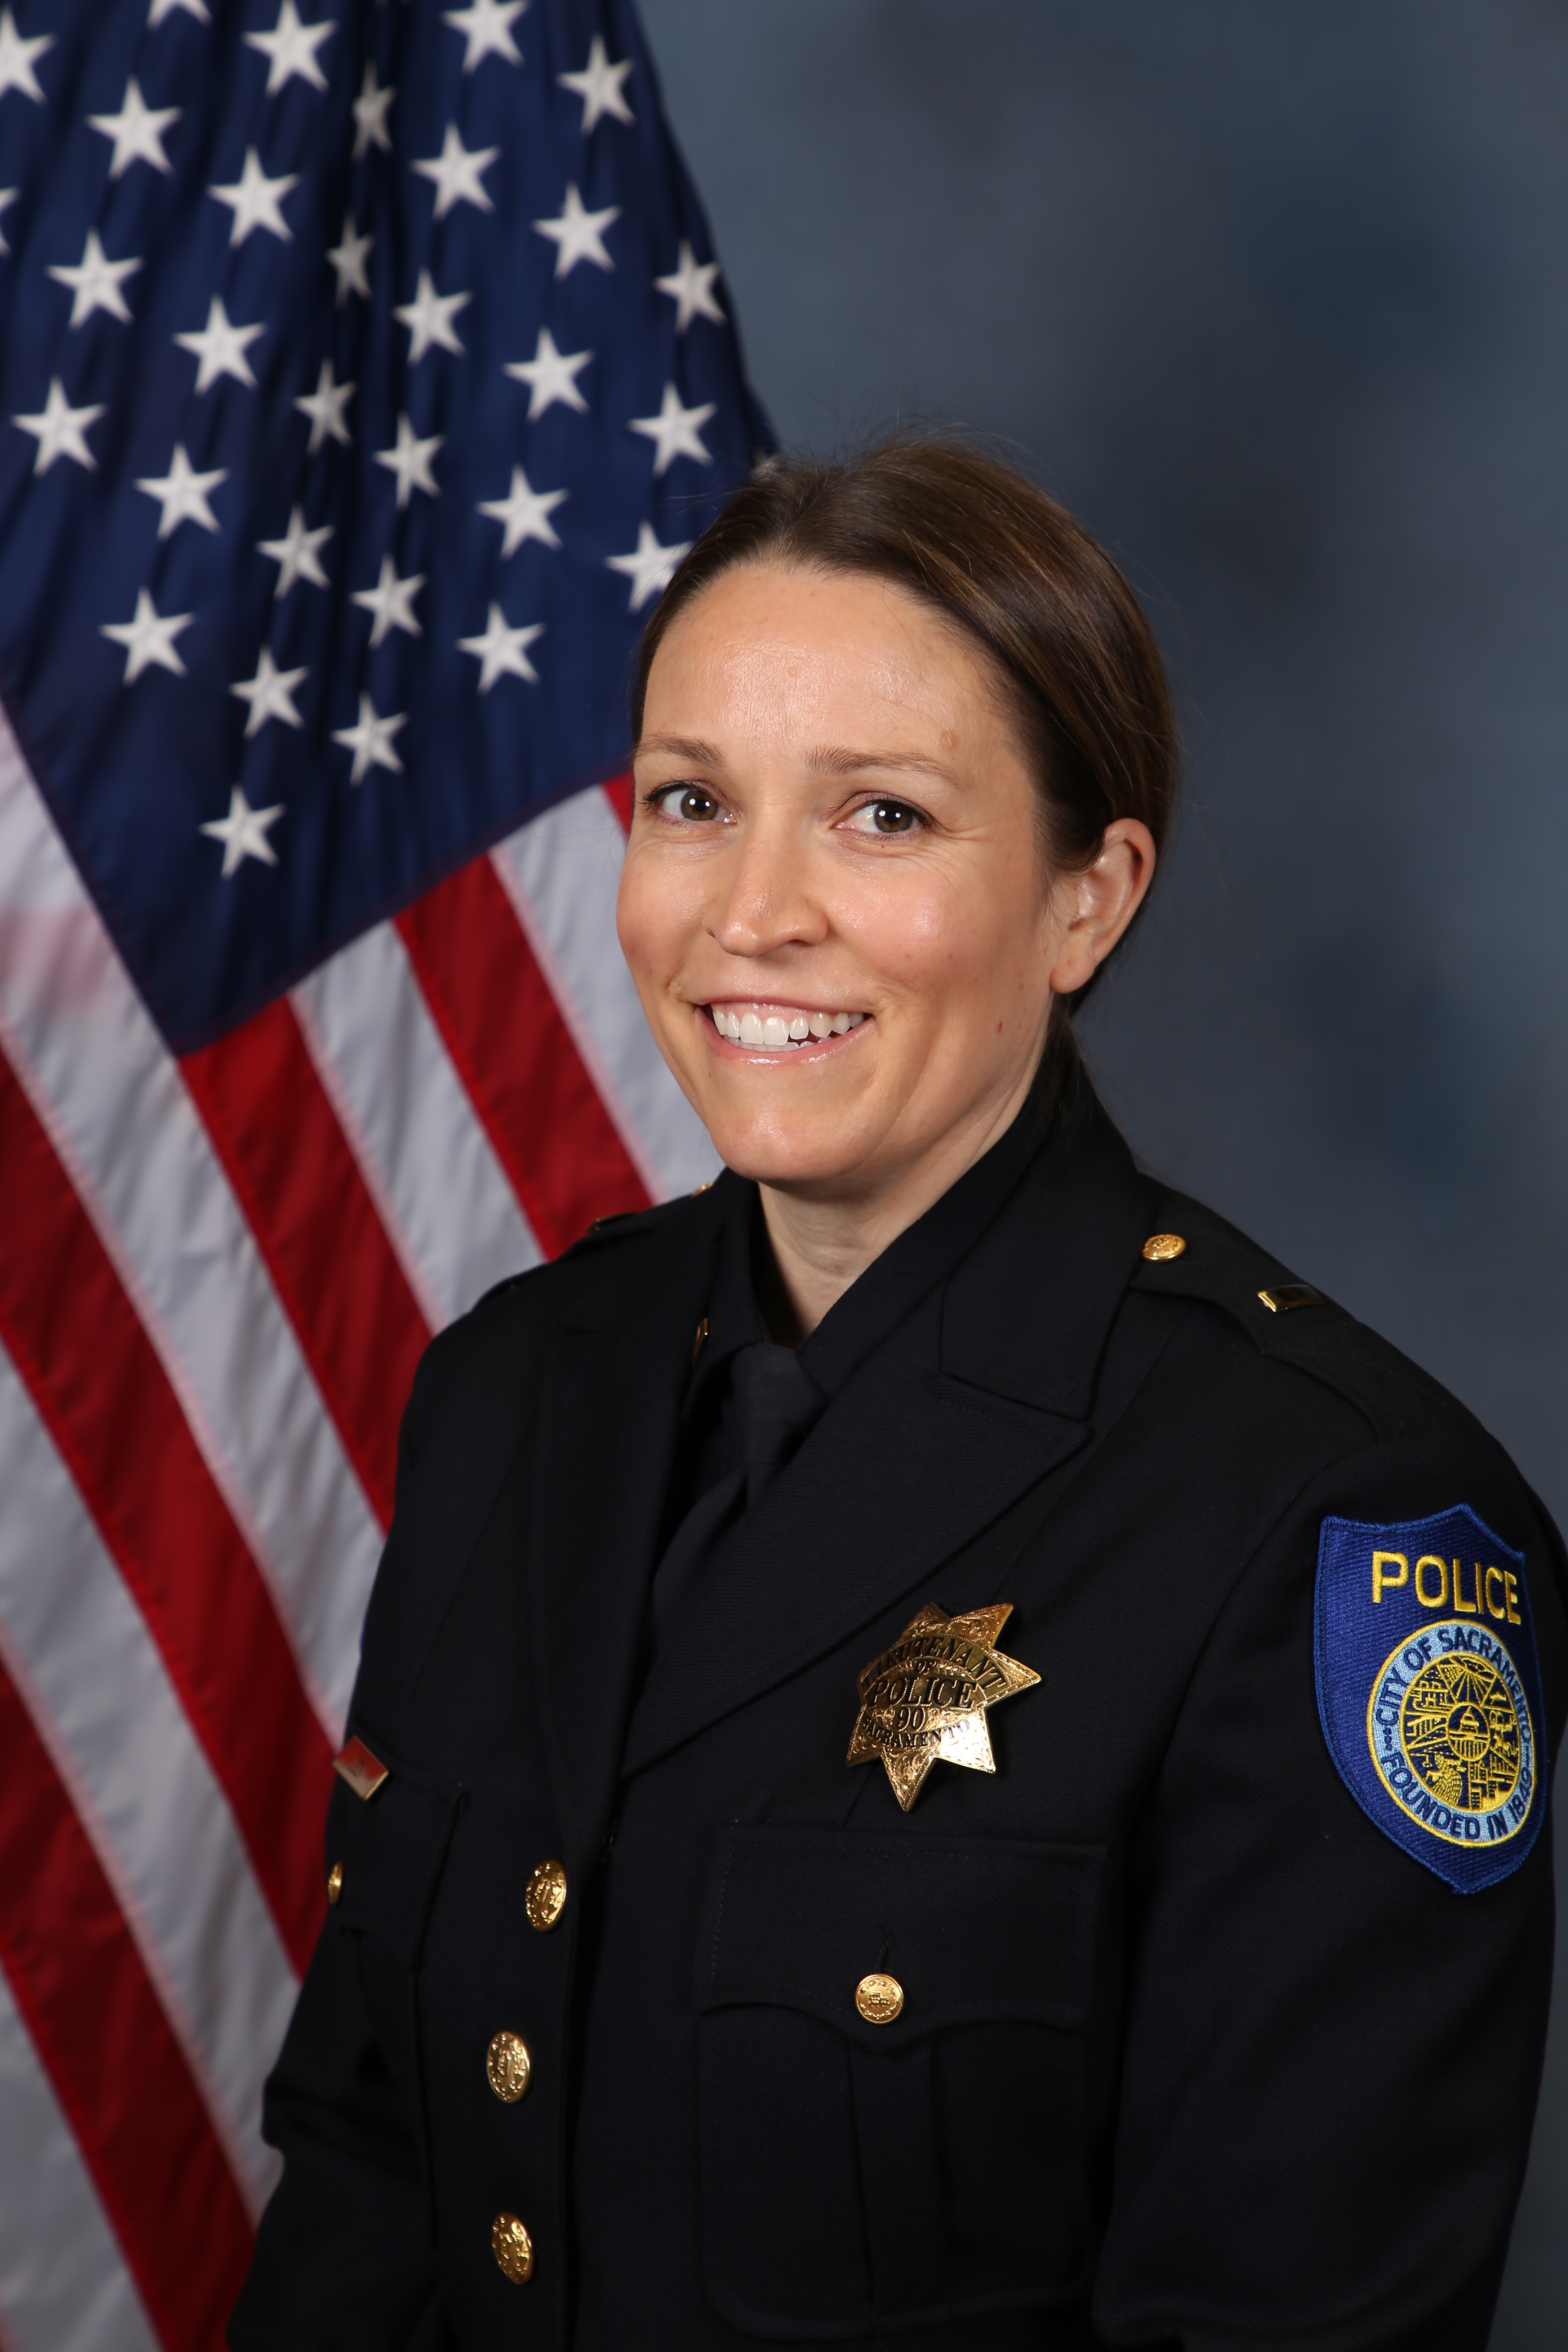 Photo of Jennifer Ligon in uniform standing in front of the American flag.